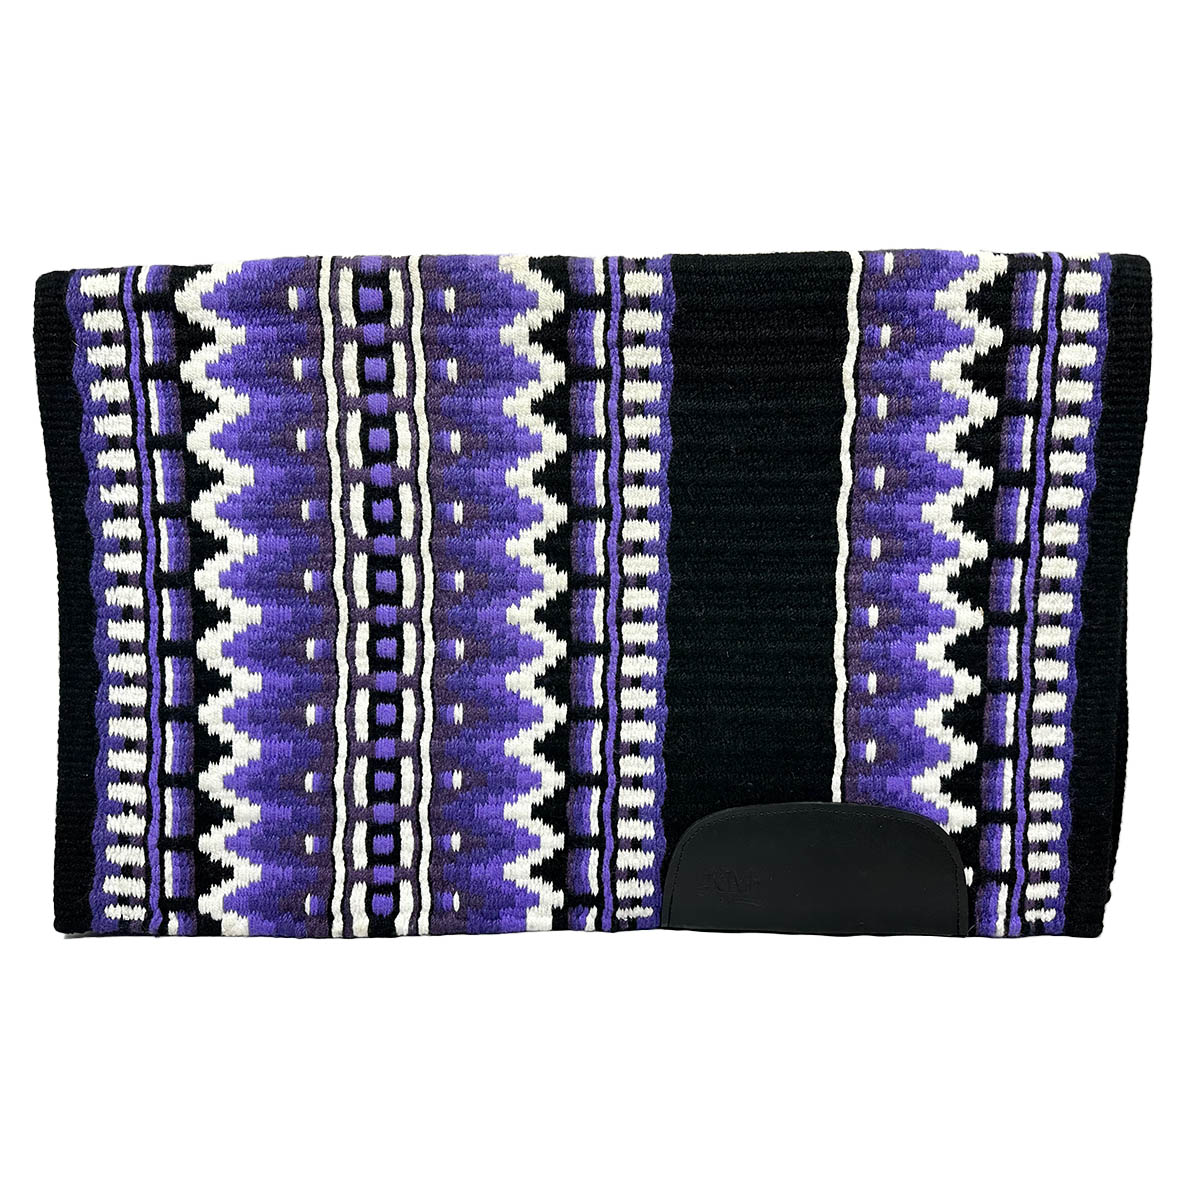 Saddle pad with layered purple and lavender